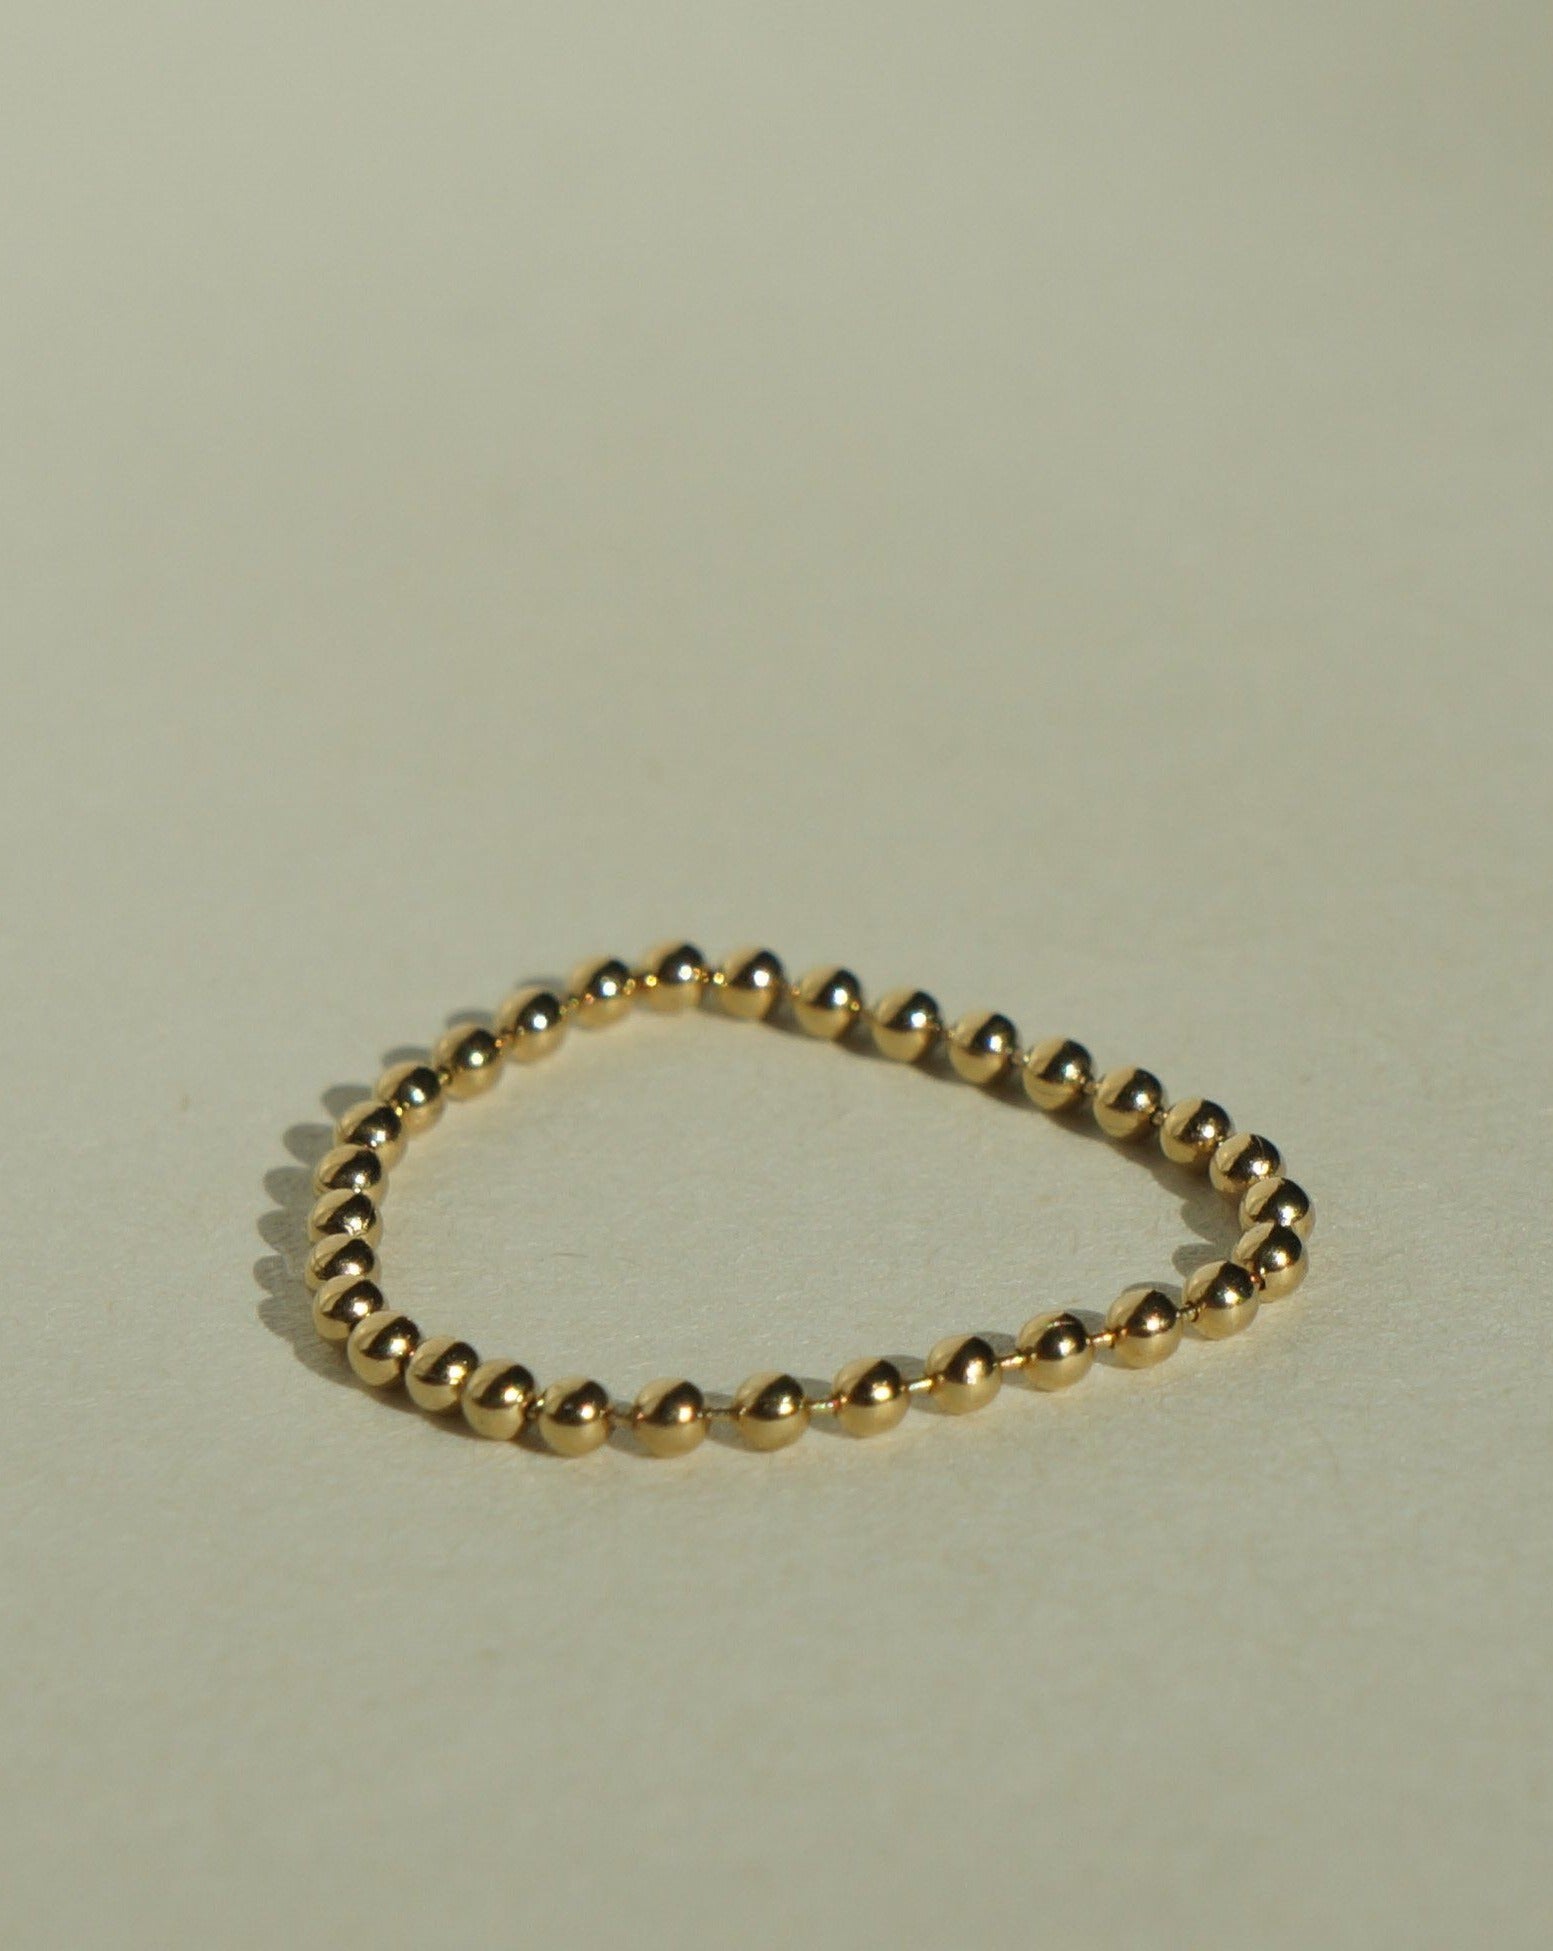 Beaded Soft Chain Ring by KOZAKH. A beaded soft chain ring, crafted in 14K Gold Filled.